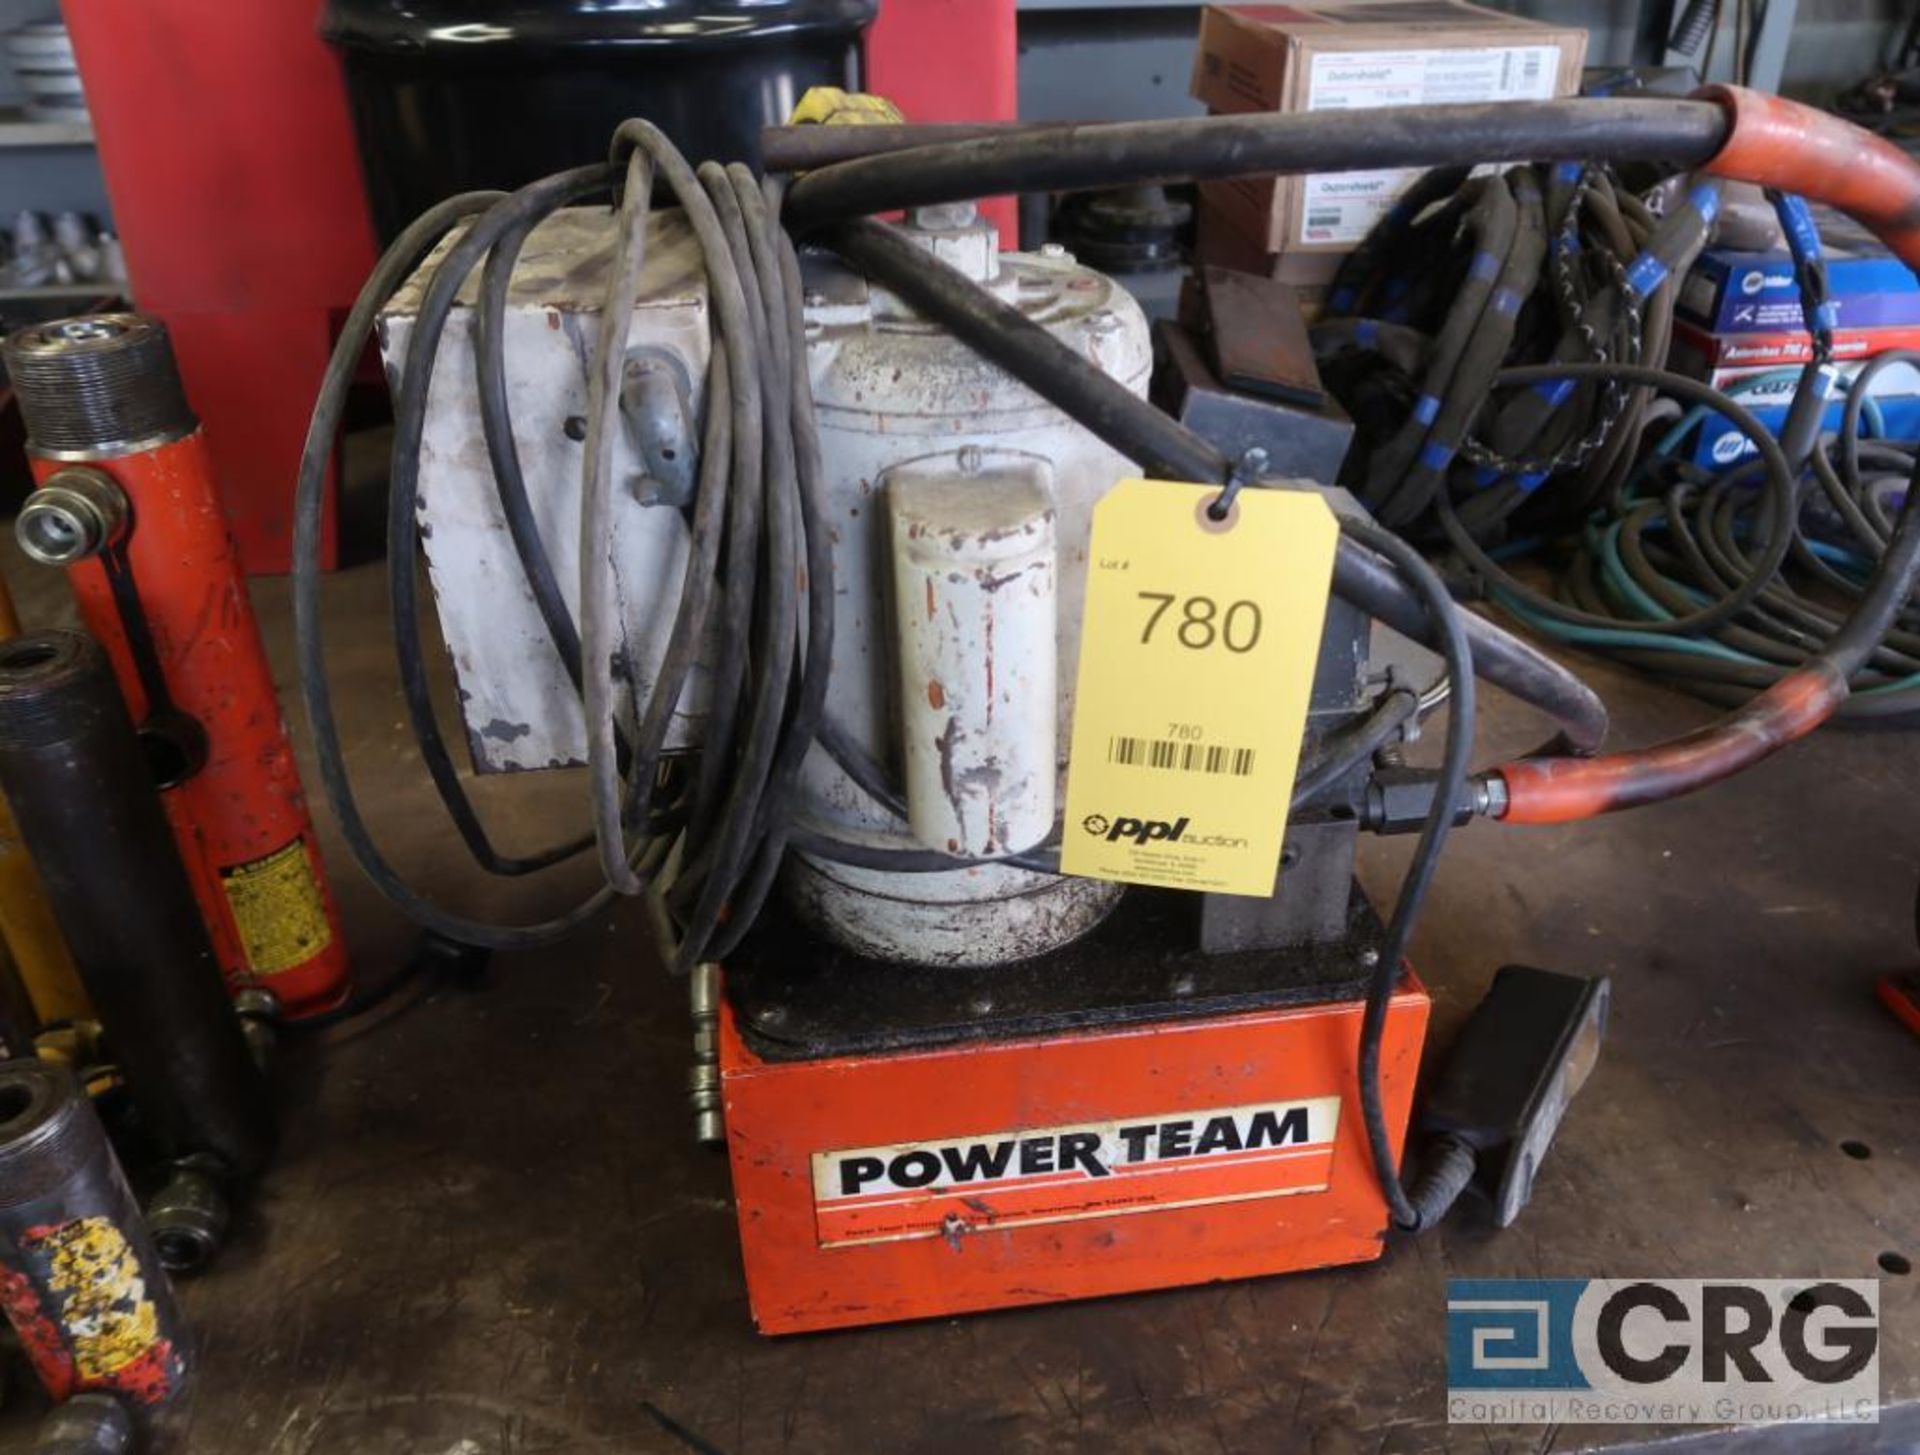 Power Team hydraulic power unit with 1 1/2 HP motor (Pipe Shop)